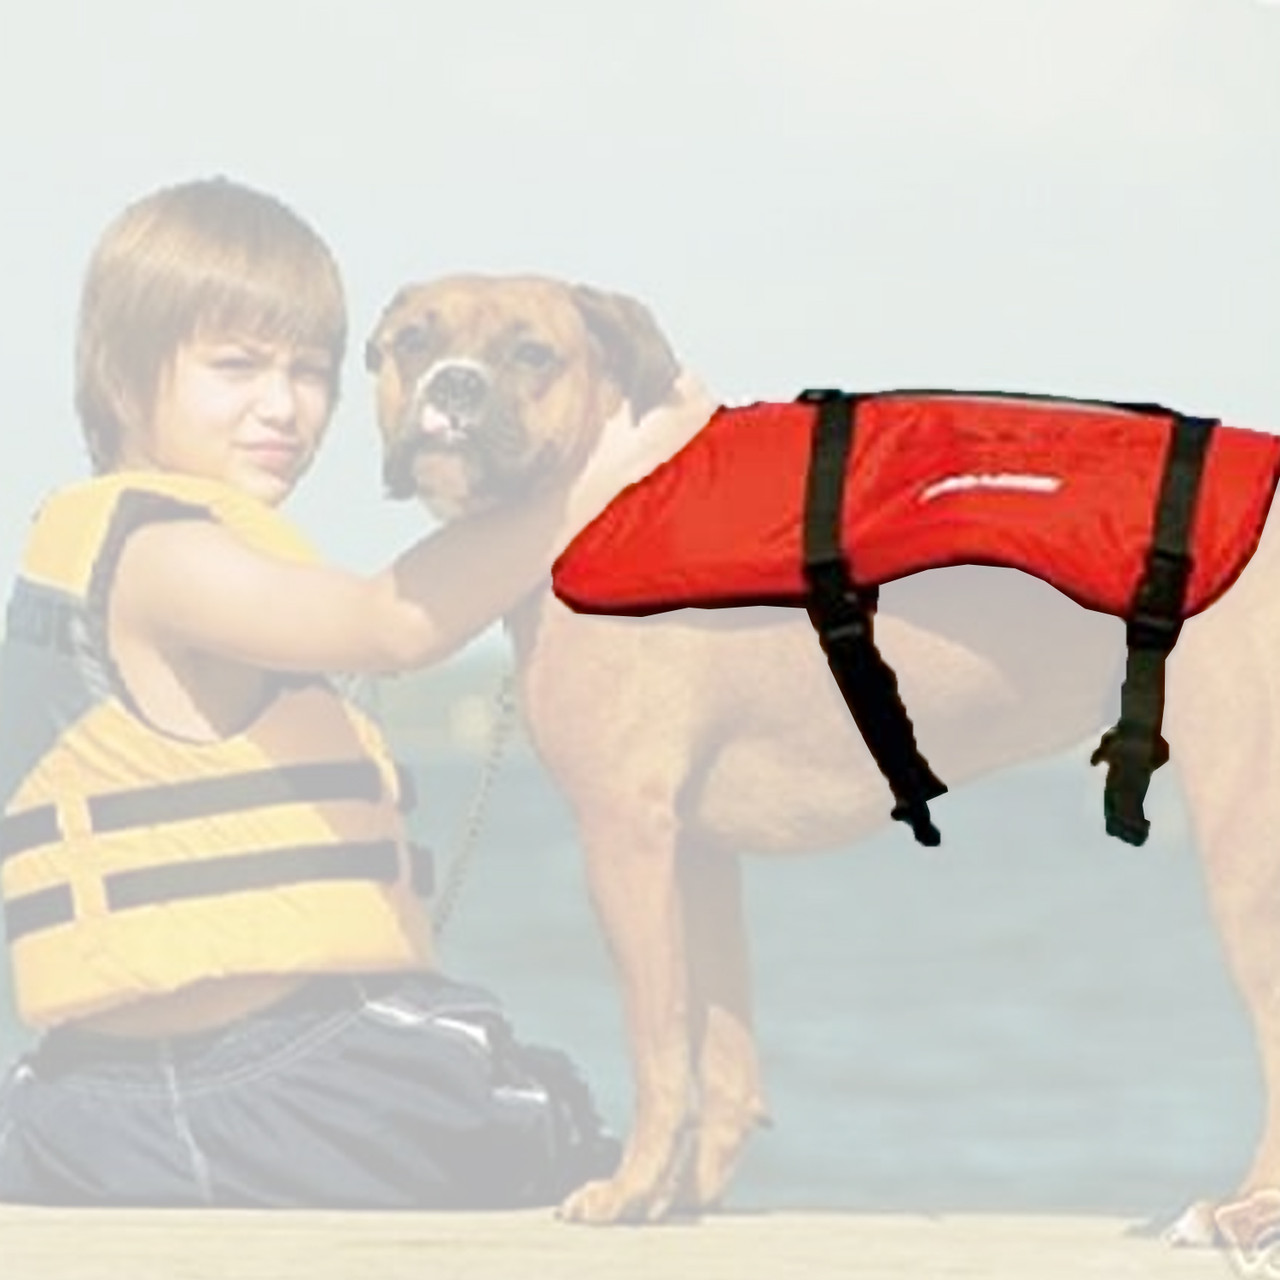 Sea-Doo New Pet PFD Life Jacket Vest for Small/Medium Dogs Red 2856997230